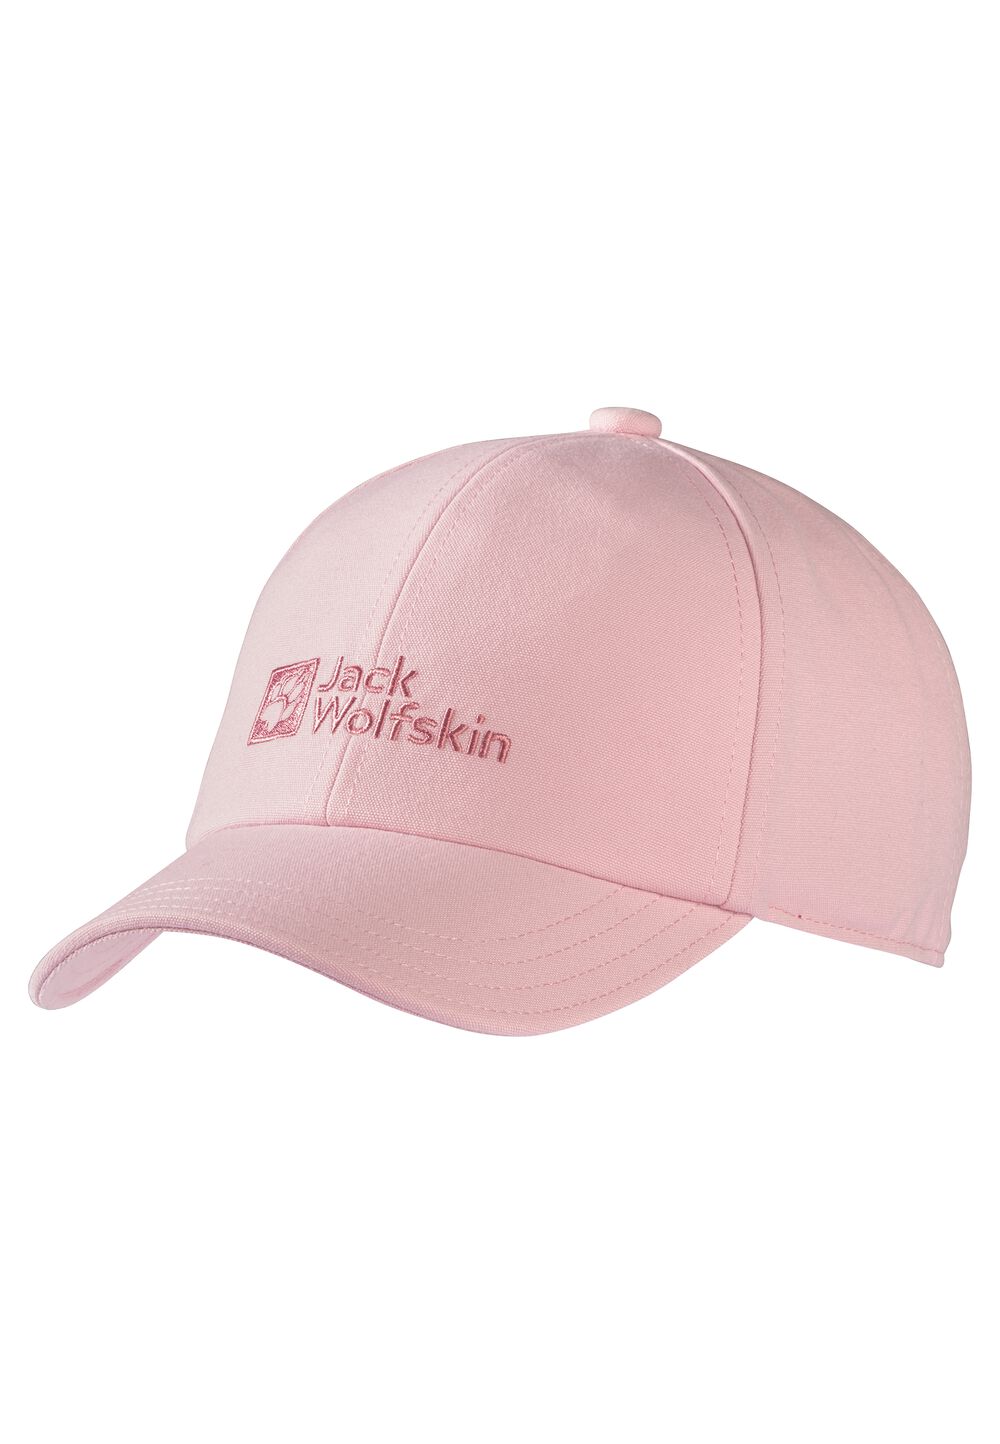 Jack Wolfskin Baseball Cap Kids Kinderen cap one size water lily water lily